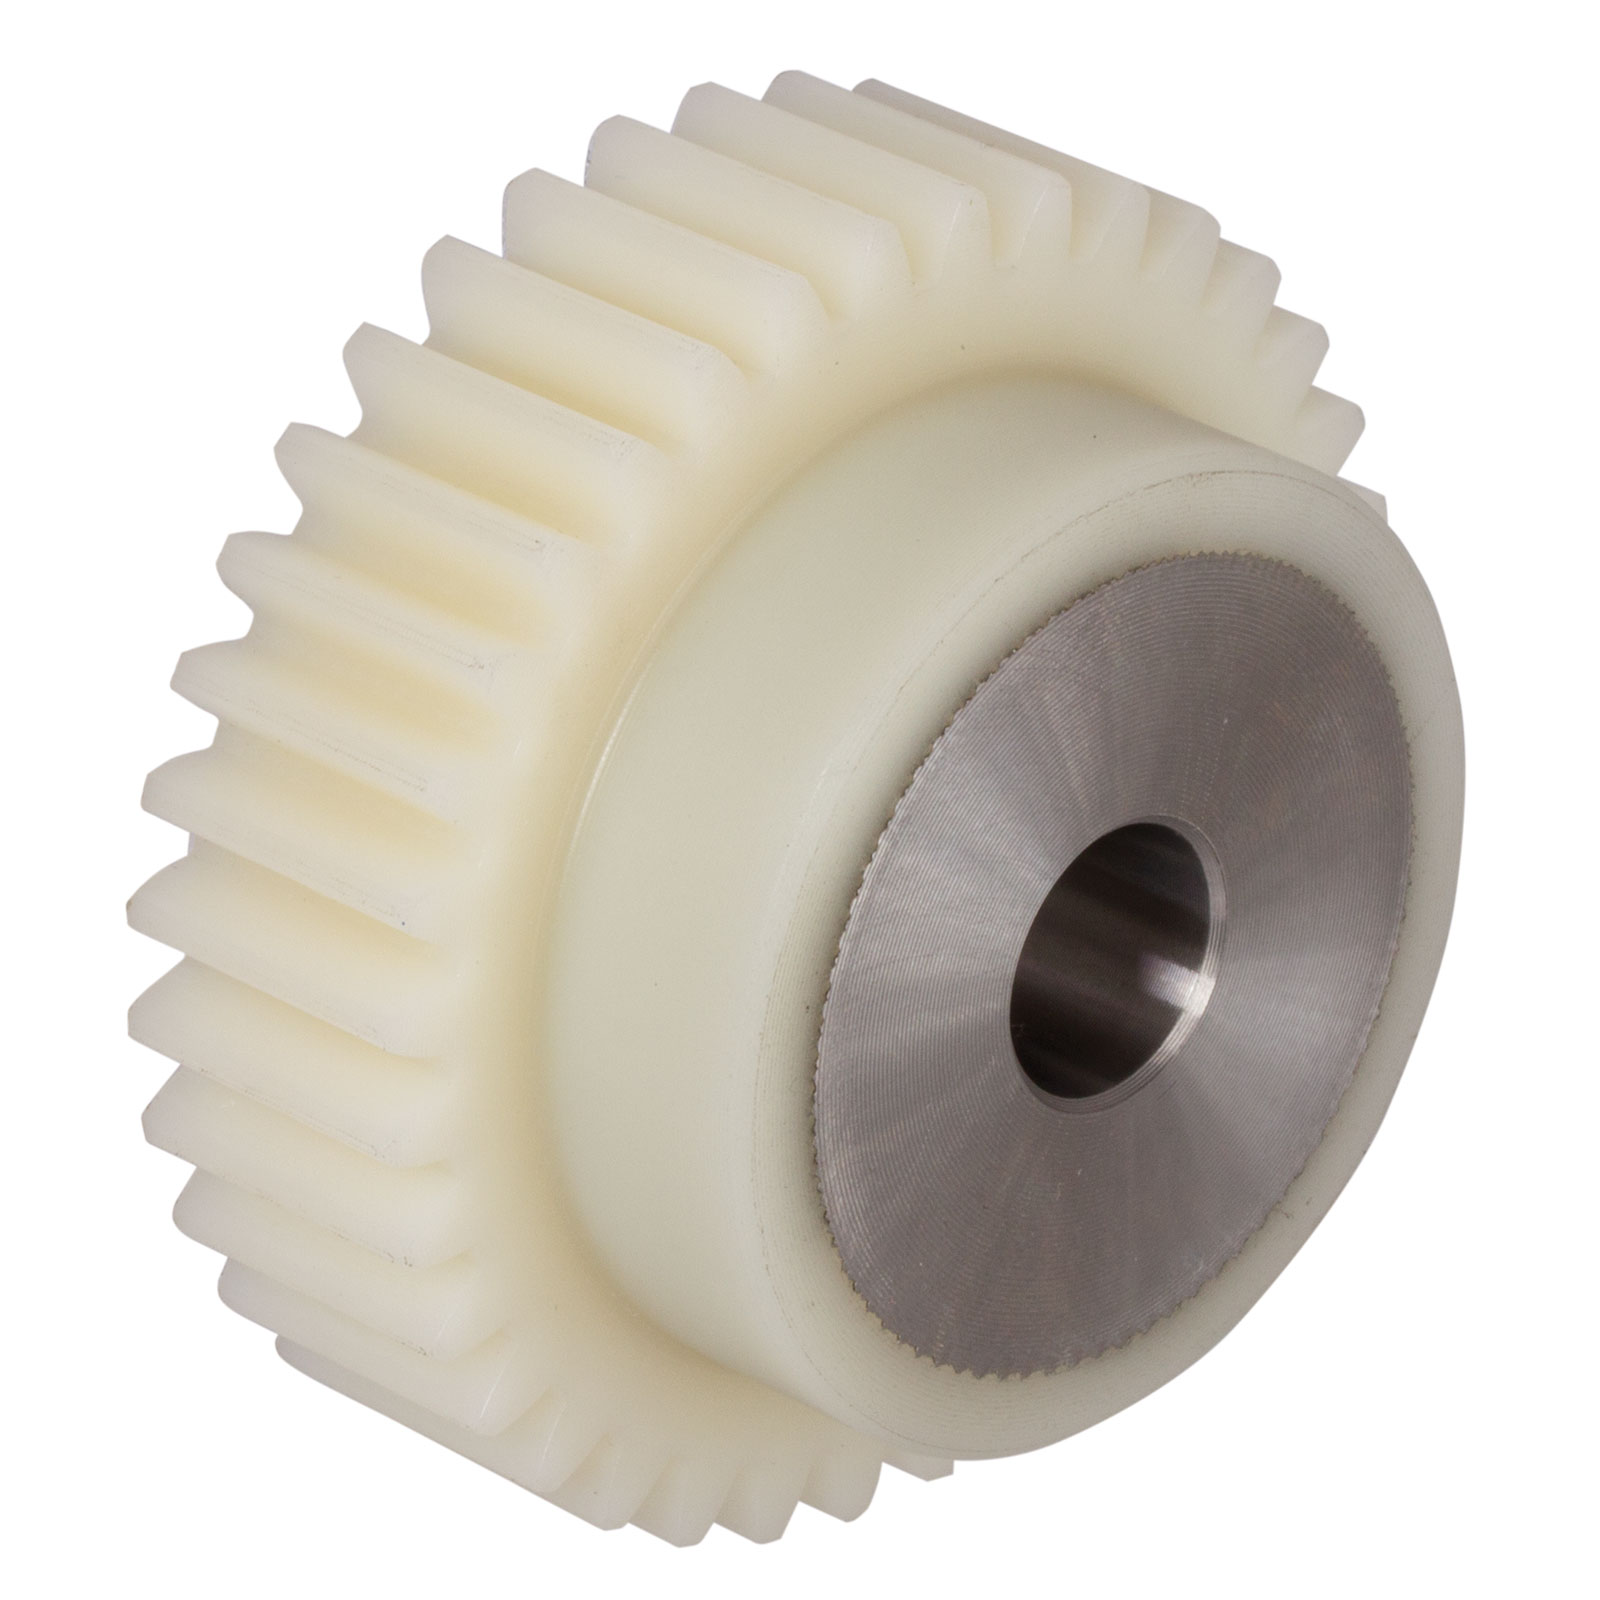 Spur gear made of plastic PA12G with stainless steel core 1.4305 module 1.5 32 teeth tooth width 17mm outside diameter 51mm 